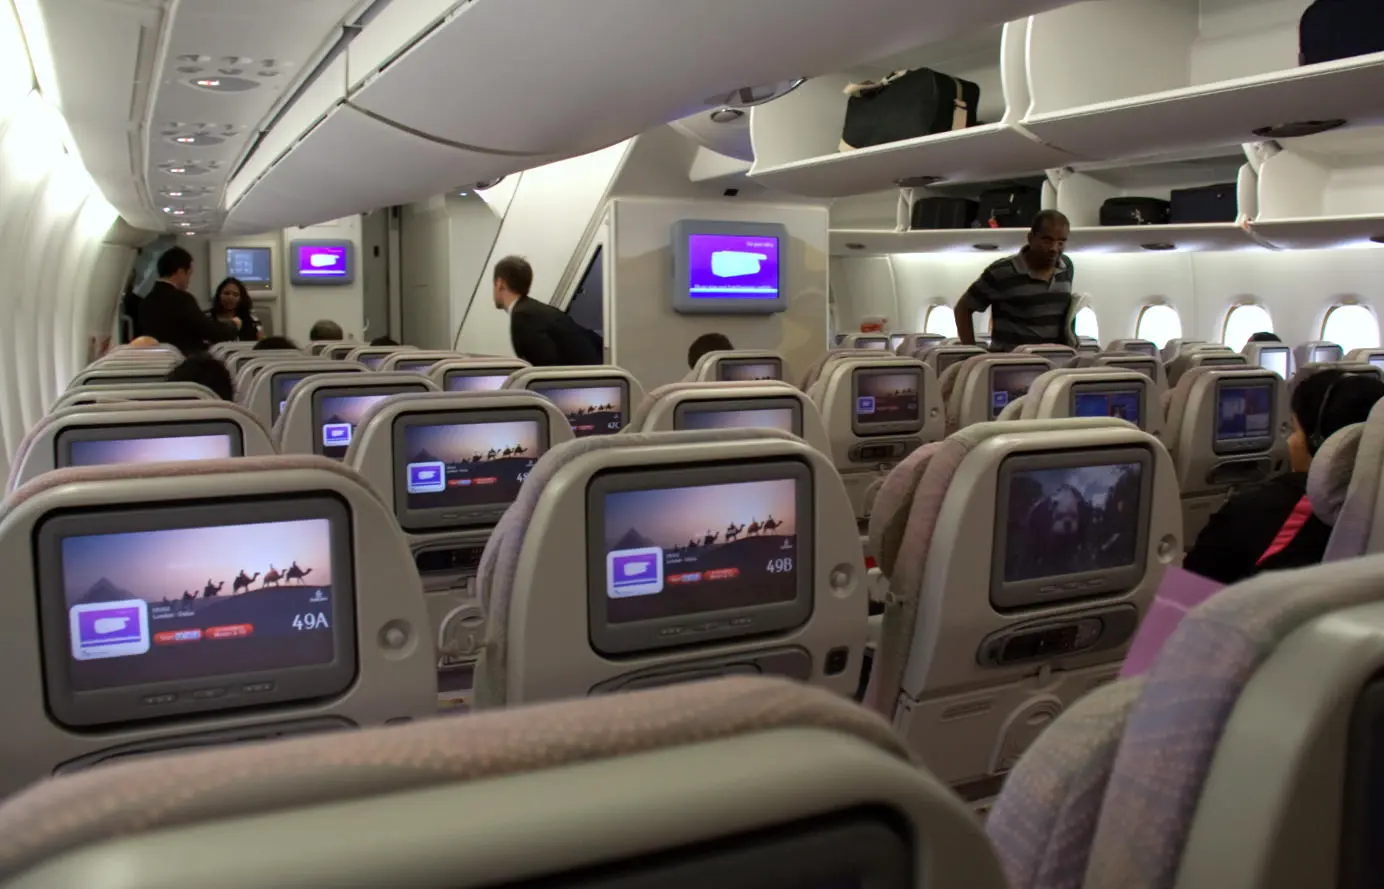 The best seats on airbus a380 are window or aisle